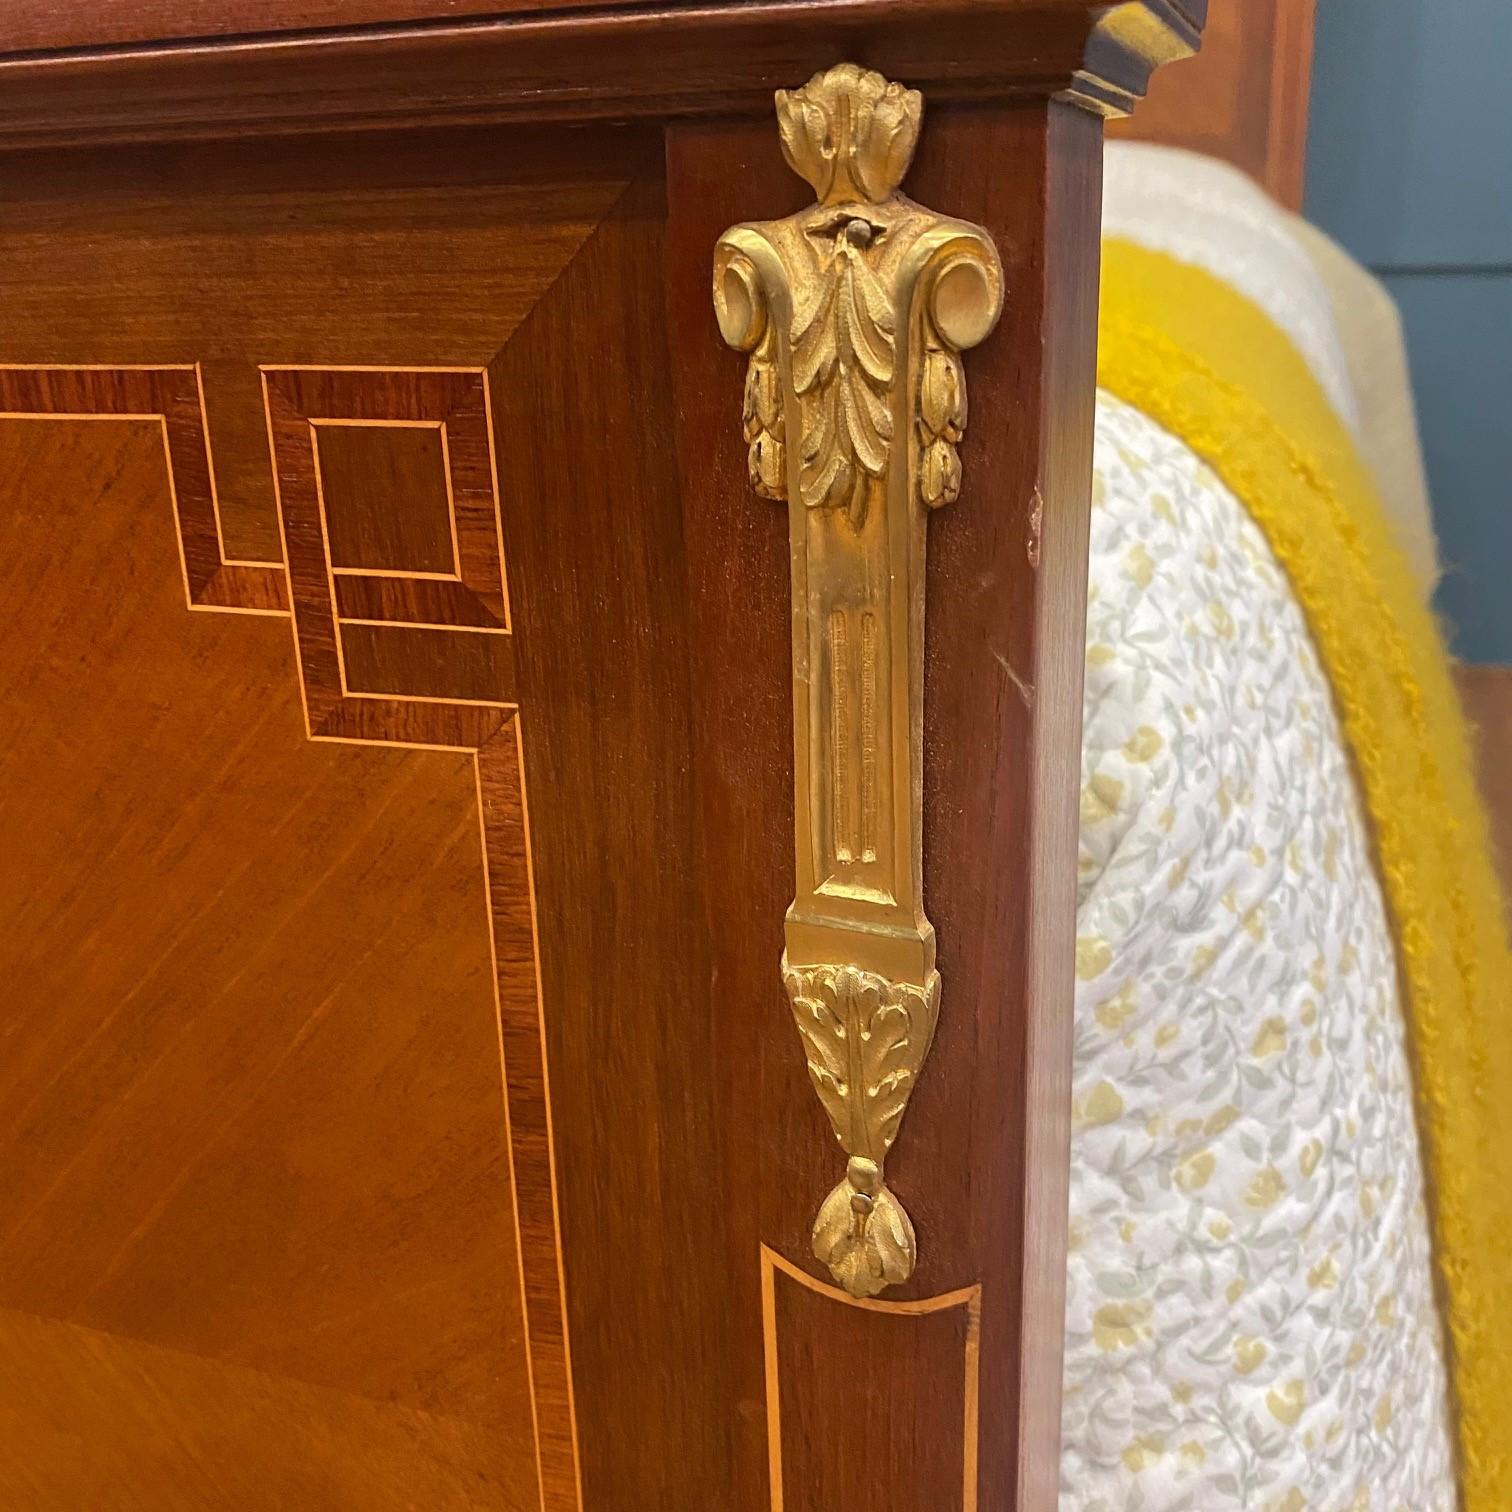 Lovely Walnut bed displaying laurel swag decorative inlaid marquetry, inlaid fruit wood frame, ormolu gilded decorative highlights on the headboard and foot end edges and finished with brass feet detailing. The bed has been sympathetically restored.